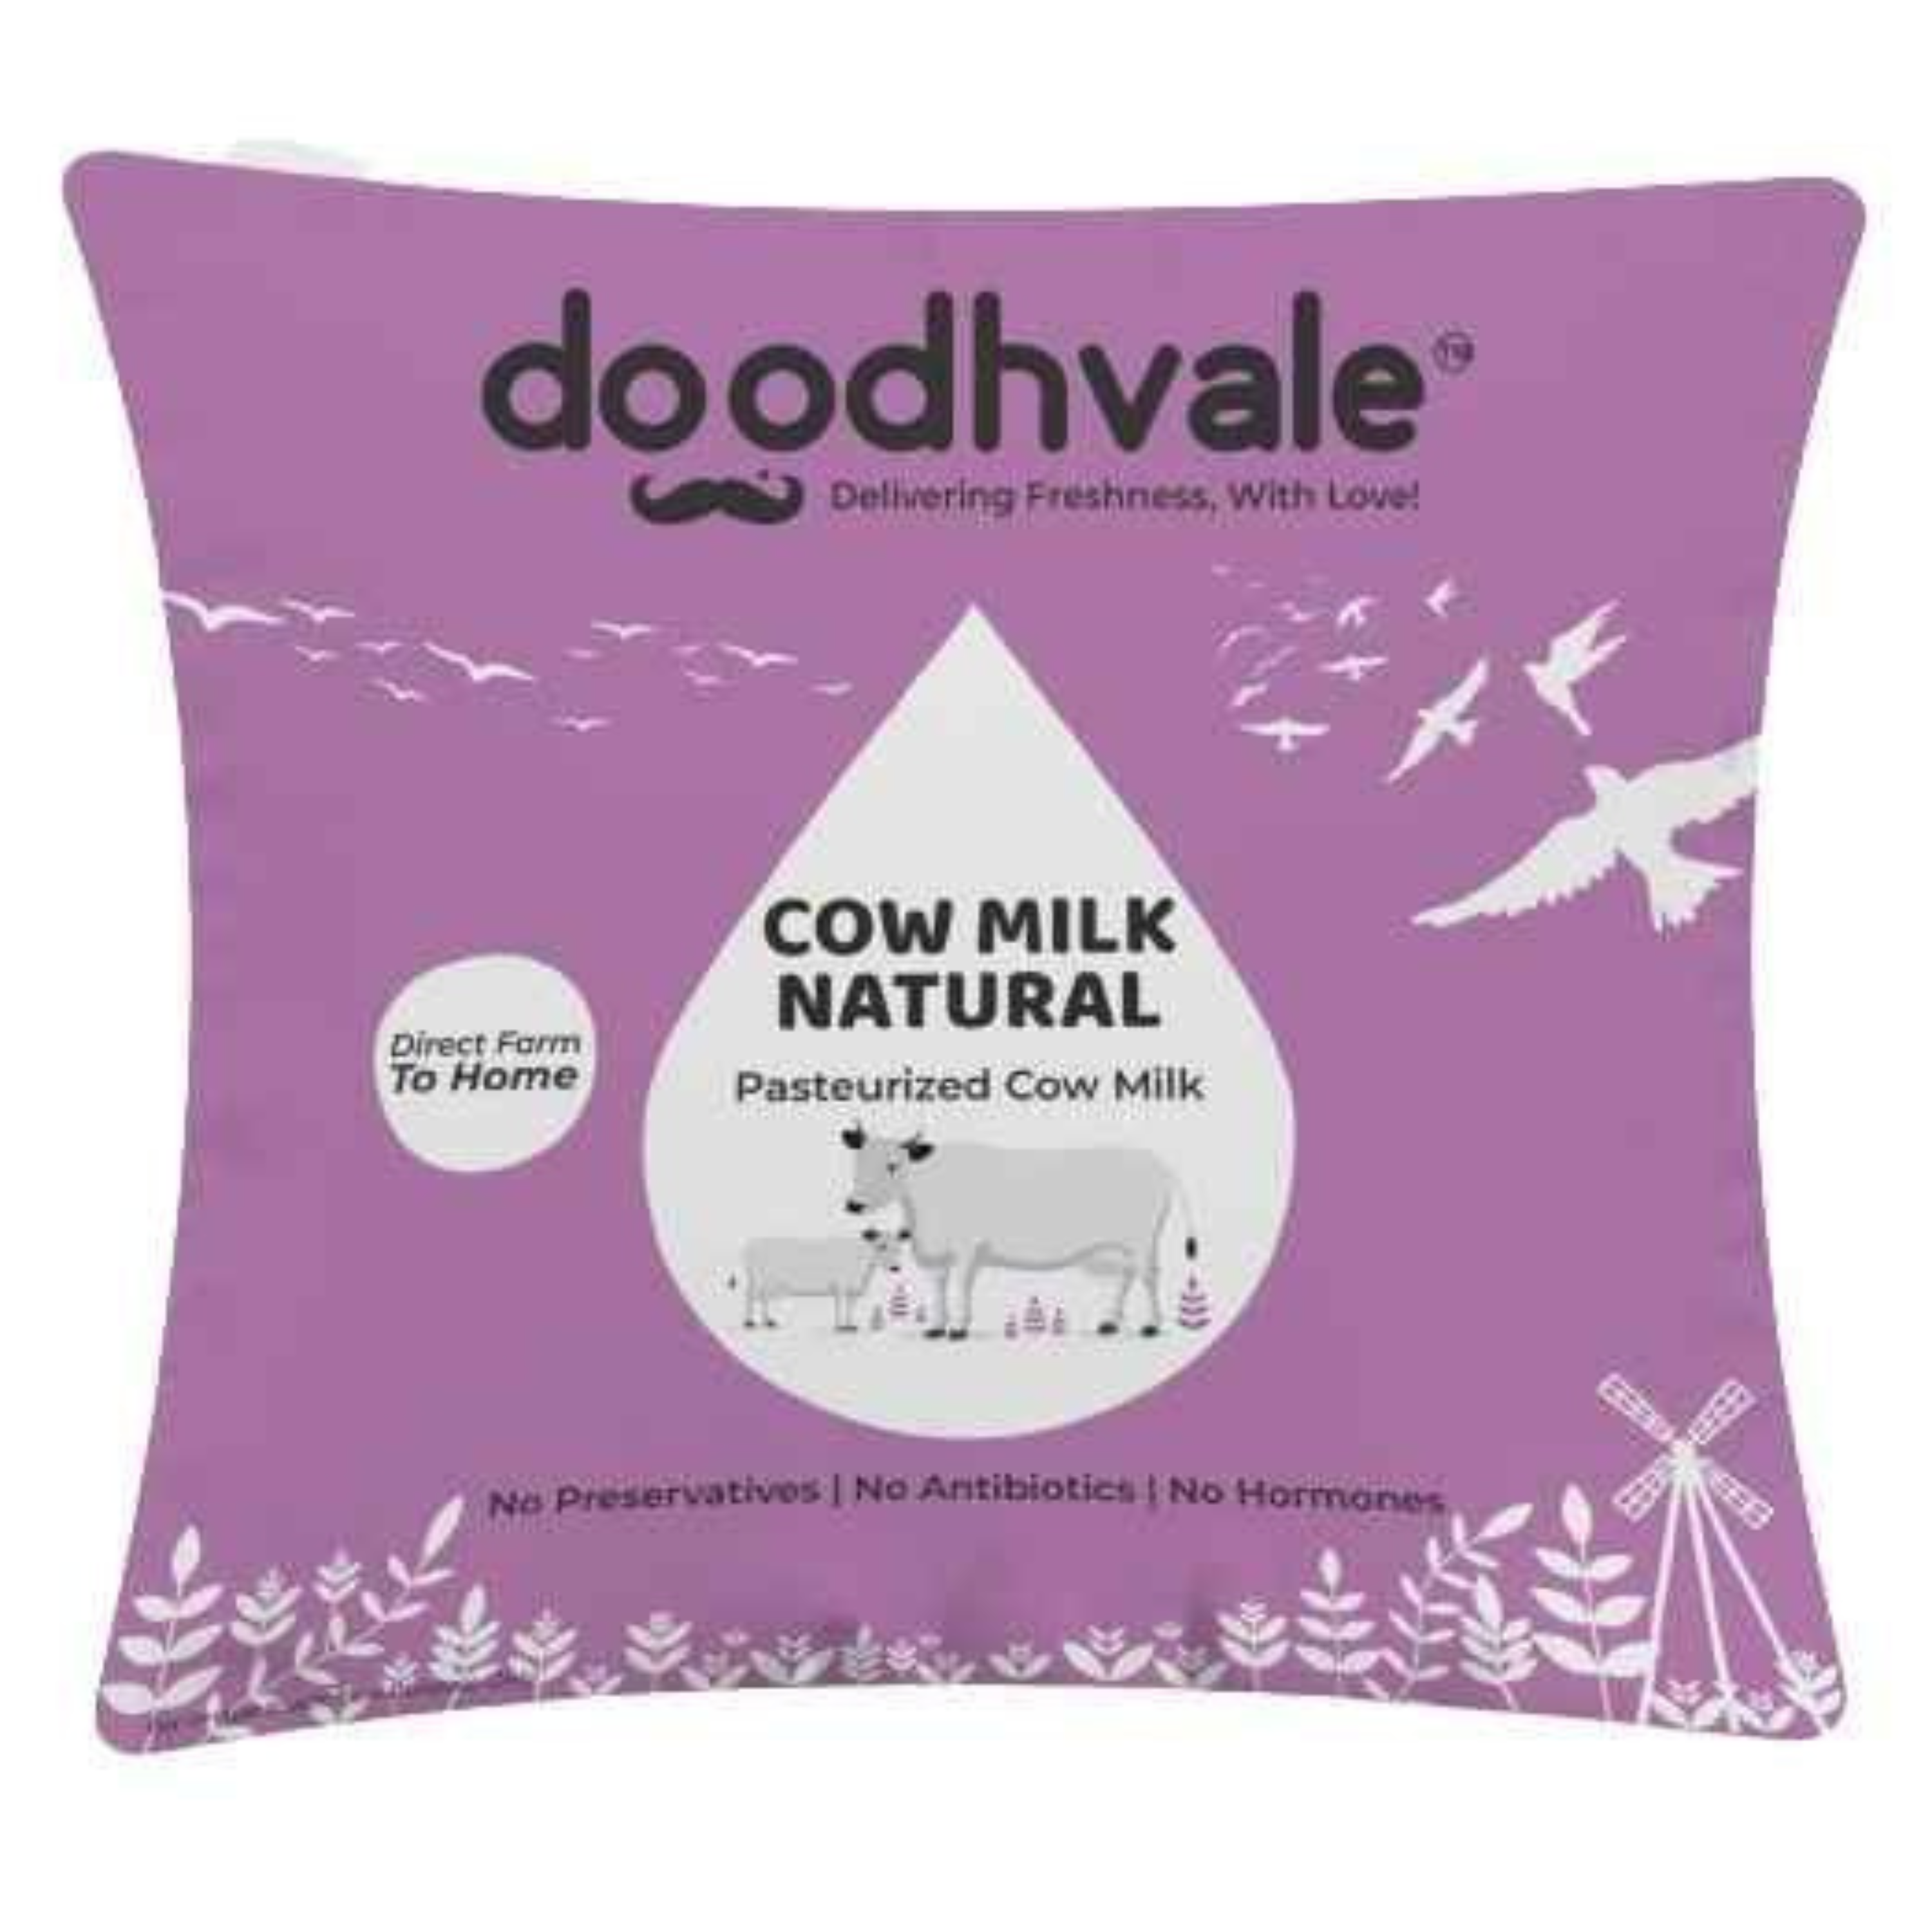 Buy Farm Fresh Cow Milk Online Delivery In Delhi NCR With In Few Minutes At Your Doorstep.